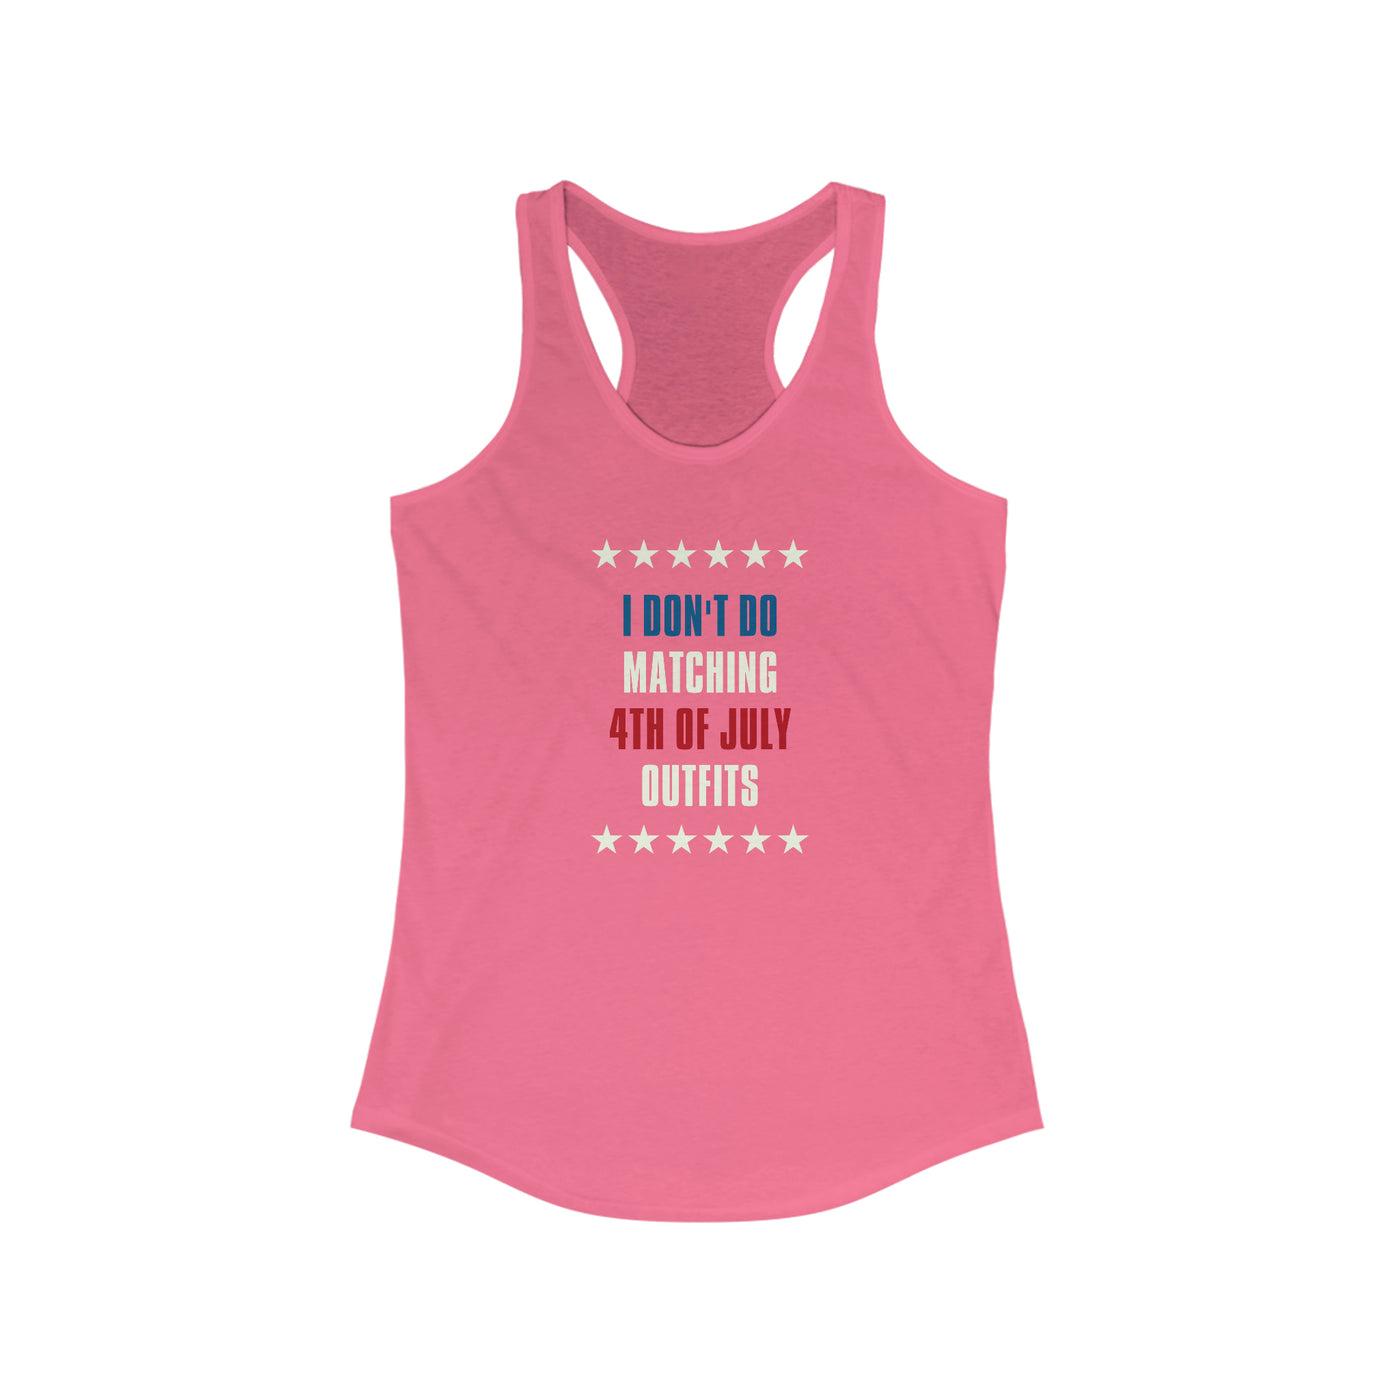 I Don't Do Matching 4th Of July Outfits Women's Racerback Tank